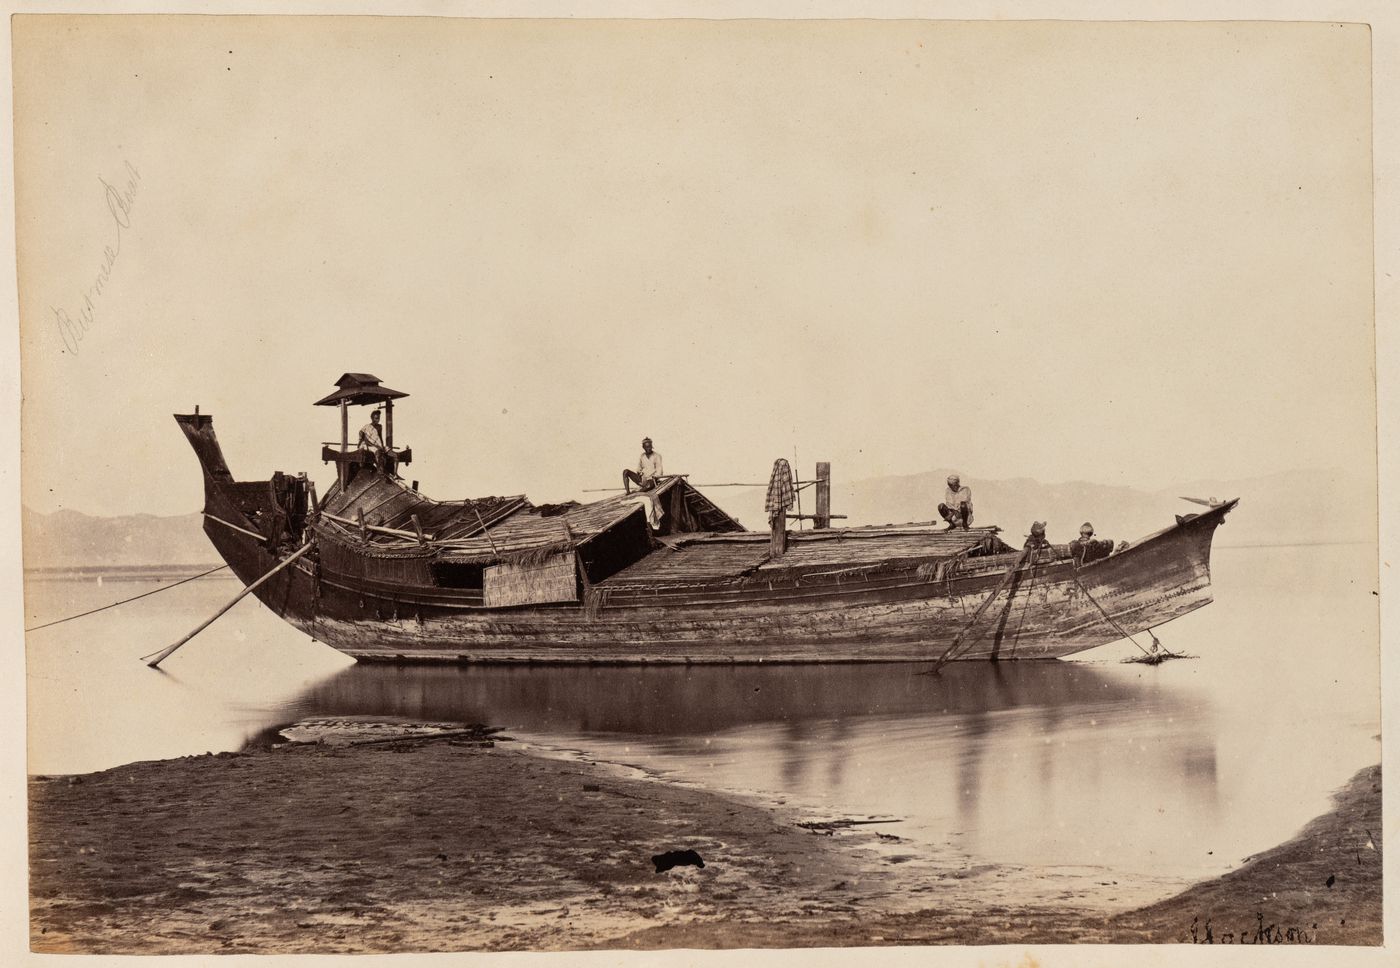 View of a boat on the Irrawaddy River, Burma (now Myanmar)